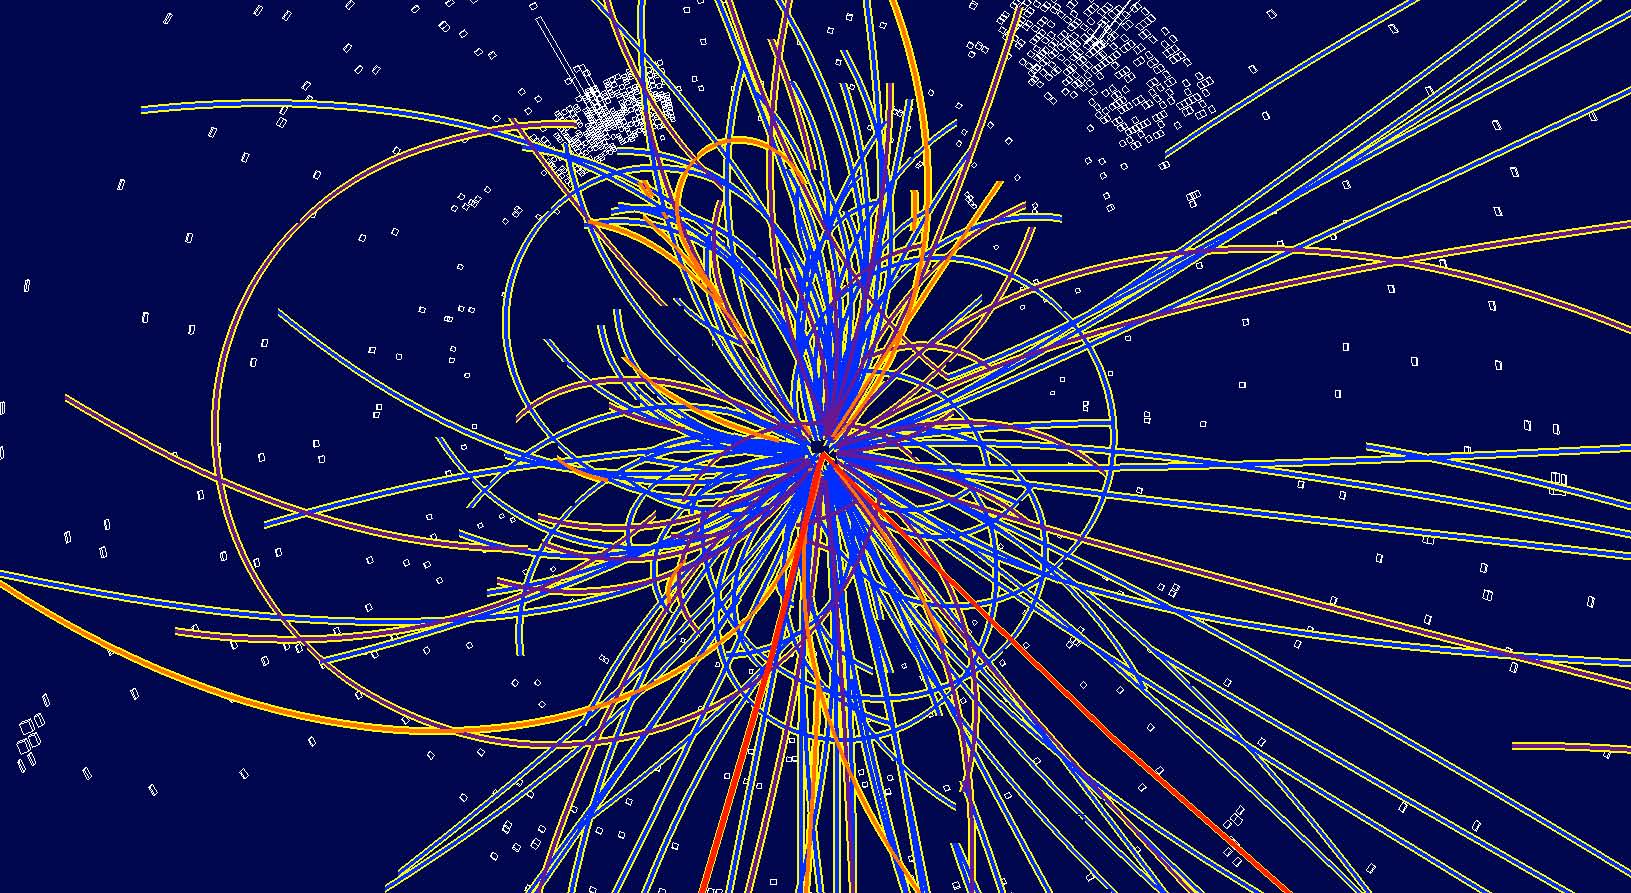 Tracks of many particles emerging from the collision of two protons